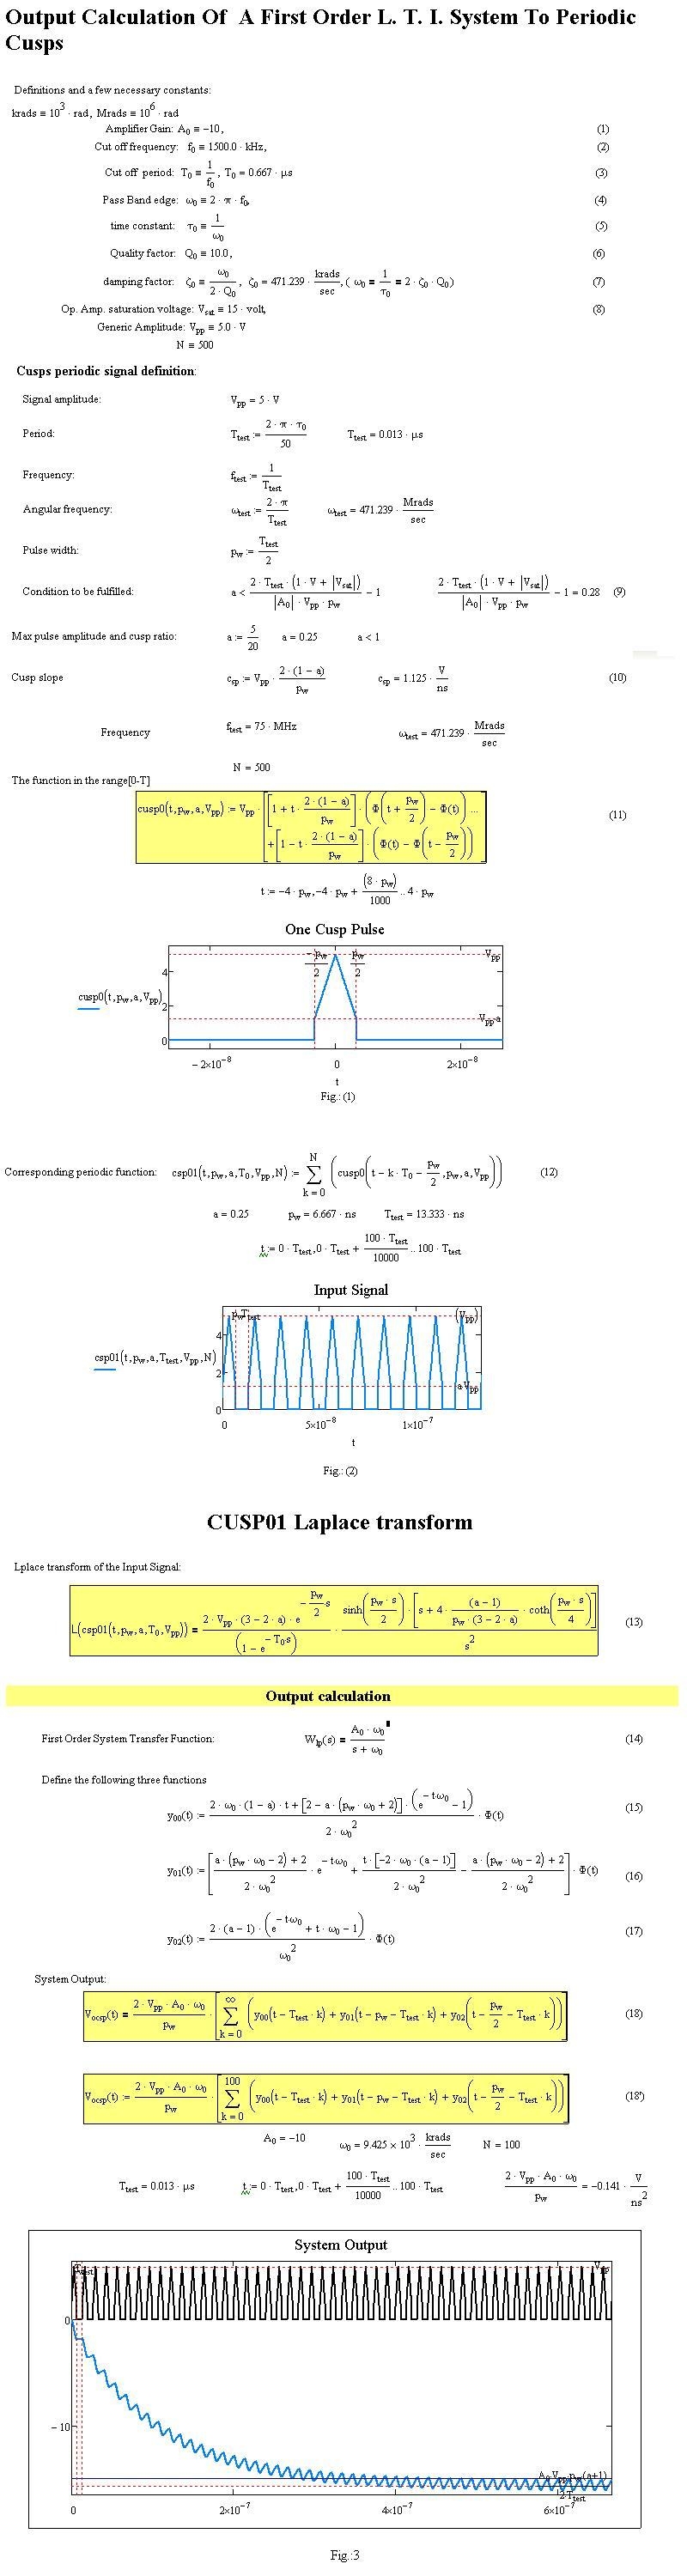 Output calculation of a first order L.T.I. system to a periodic cusps signal.JPG